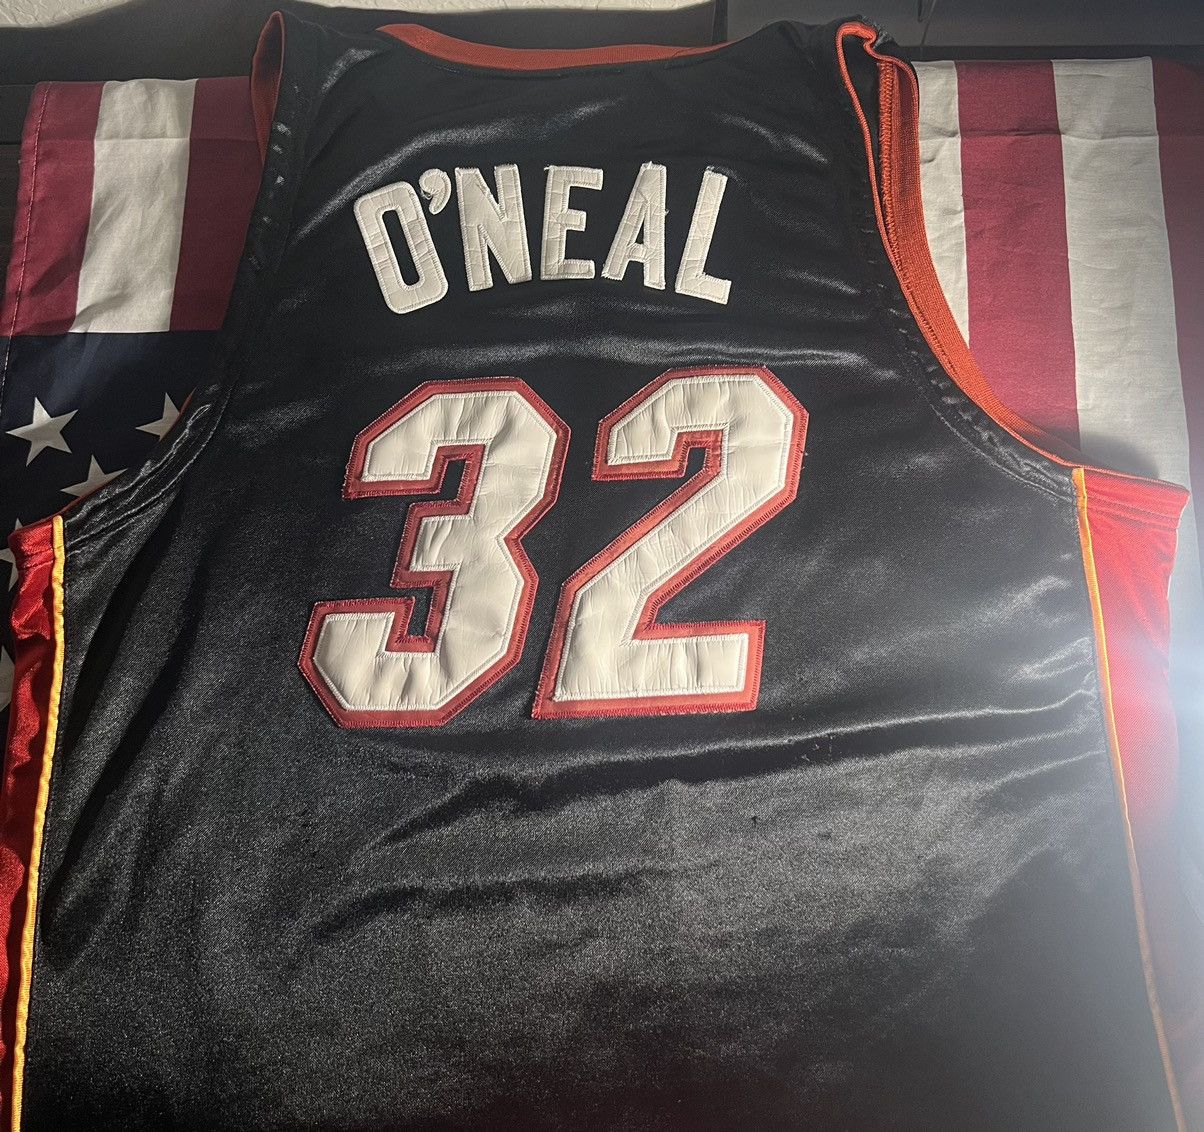 Vintage Miami Heat Shaquille O’Neal jersey Size US L / EU 52-54 / 3 - 2 Preview